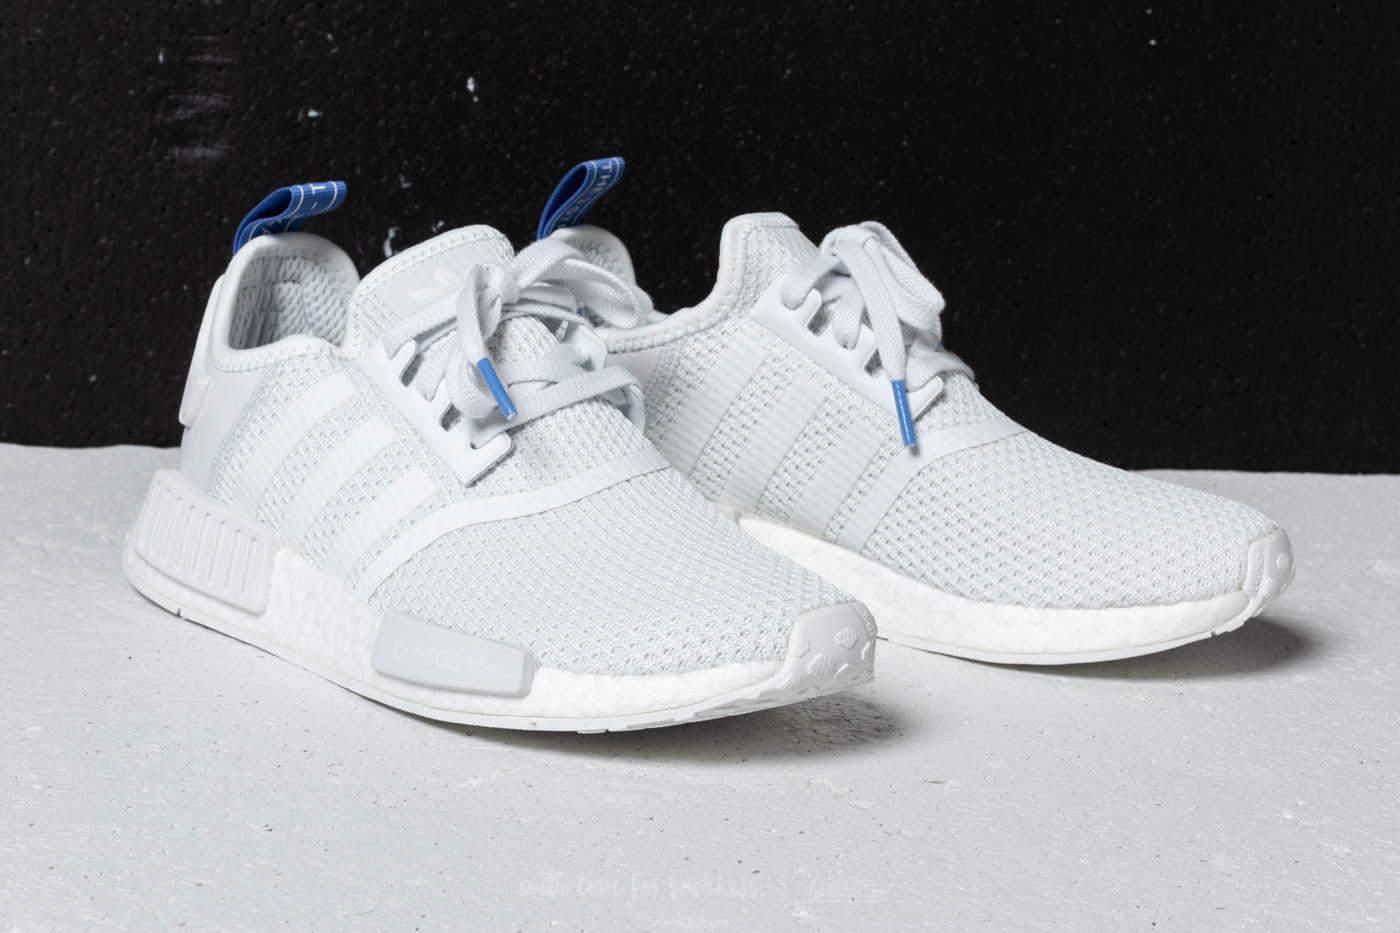 nmd_r1 shoes crystal white